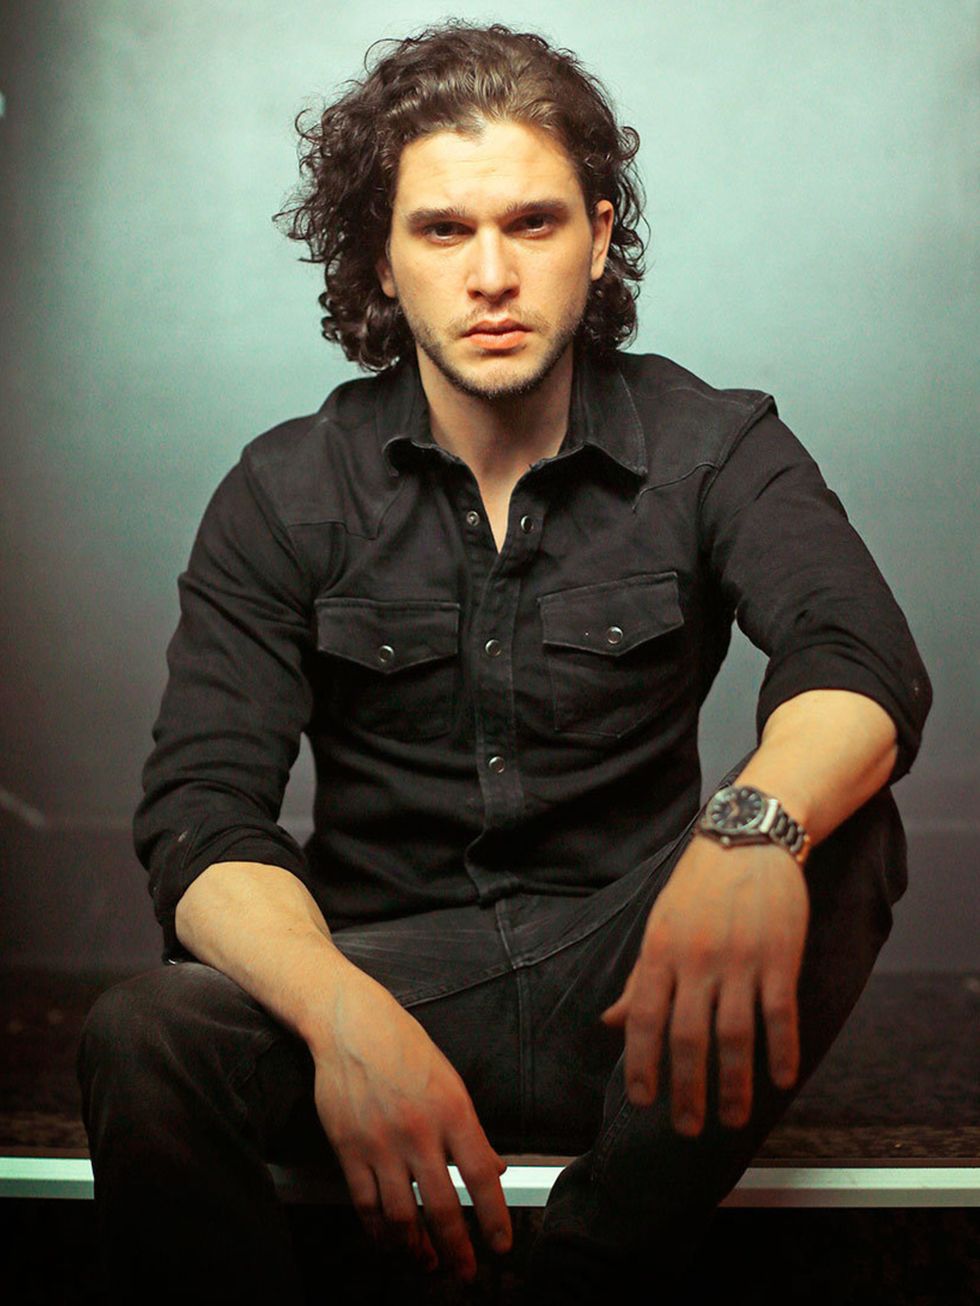 English-actor-Kit-Harington-poses-during-a-photoshoot-to-promote-his-new-movie-'Pompeii'-and-television-series-Game-of-Thrones-REX